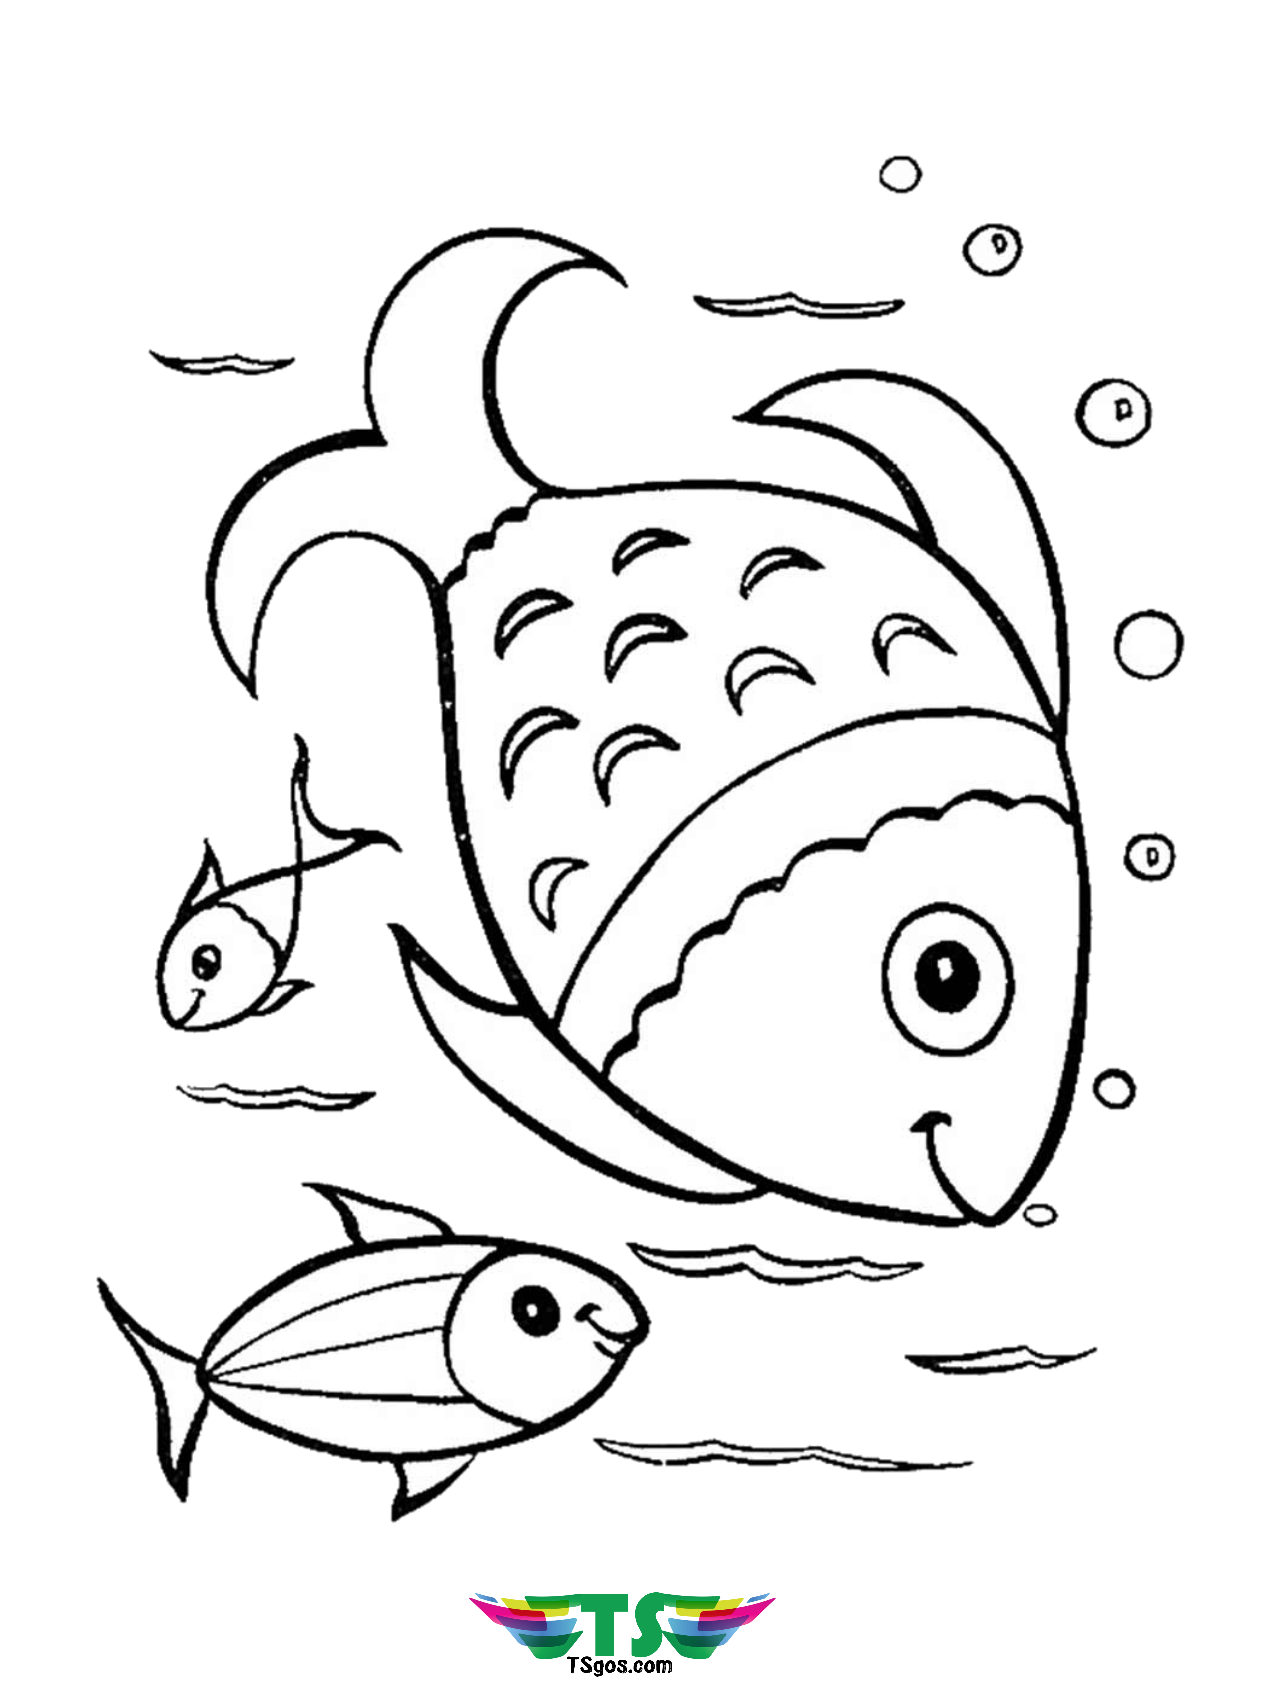 Free download beautiful fish coloring page for toddlers. Wallpaper